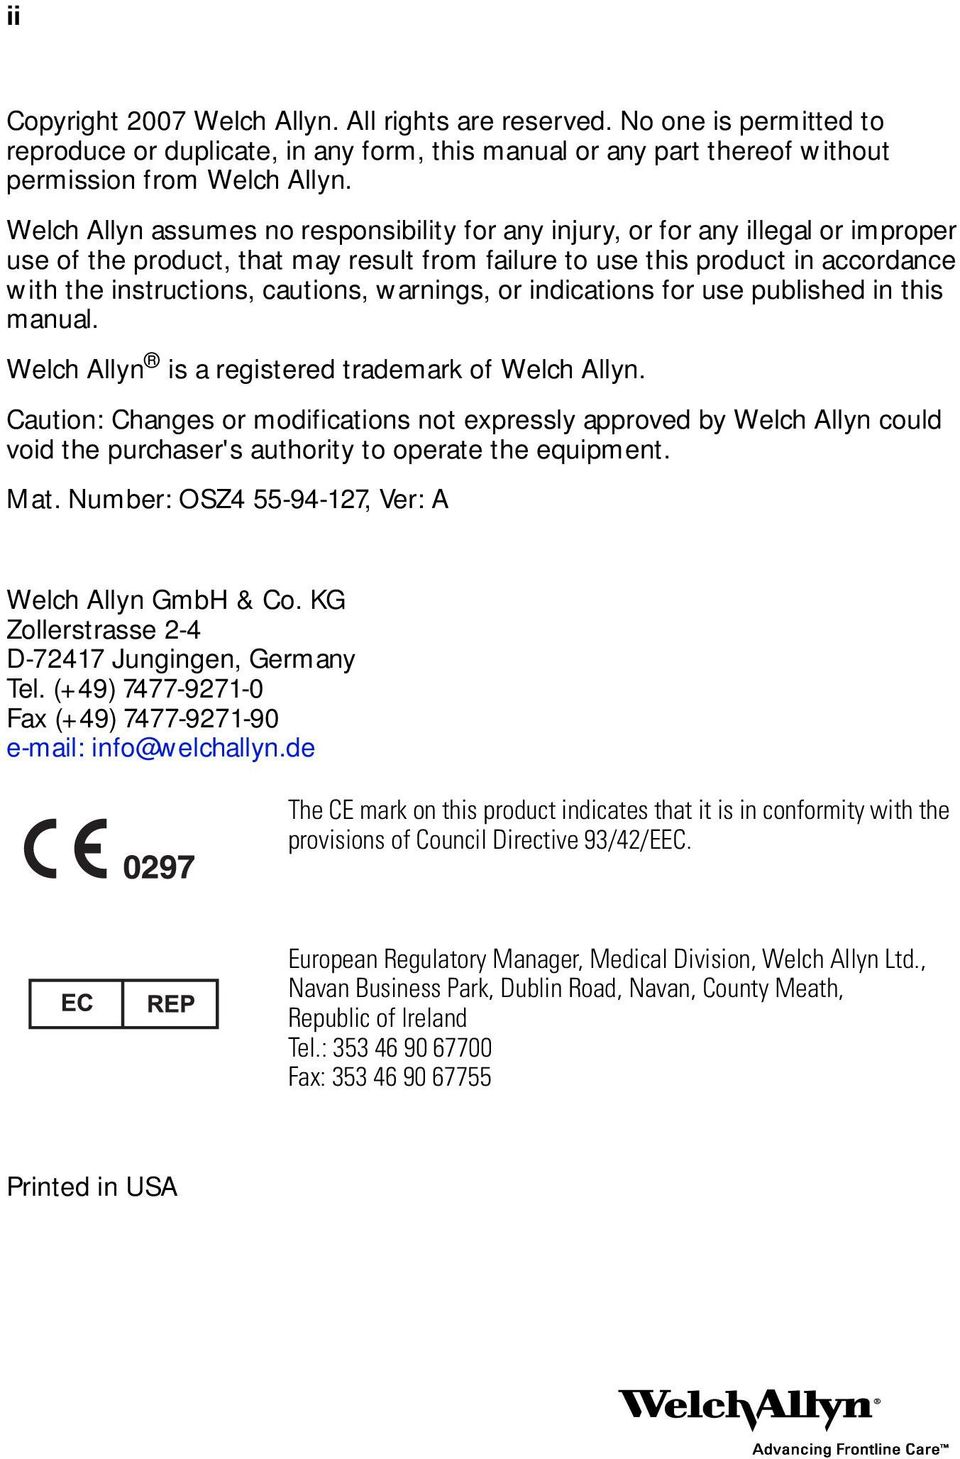 cautions, warnings, or indications for use published in this manual. Welch Allyn is a registered trademark of Welch Allyn.